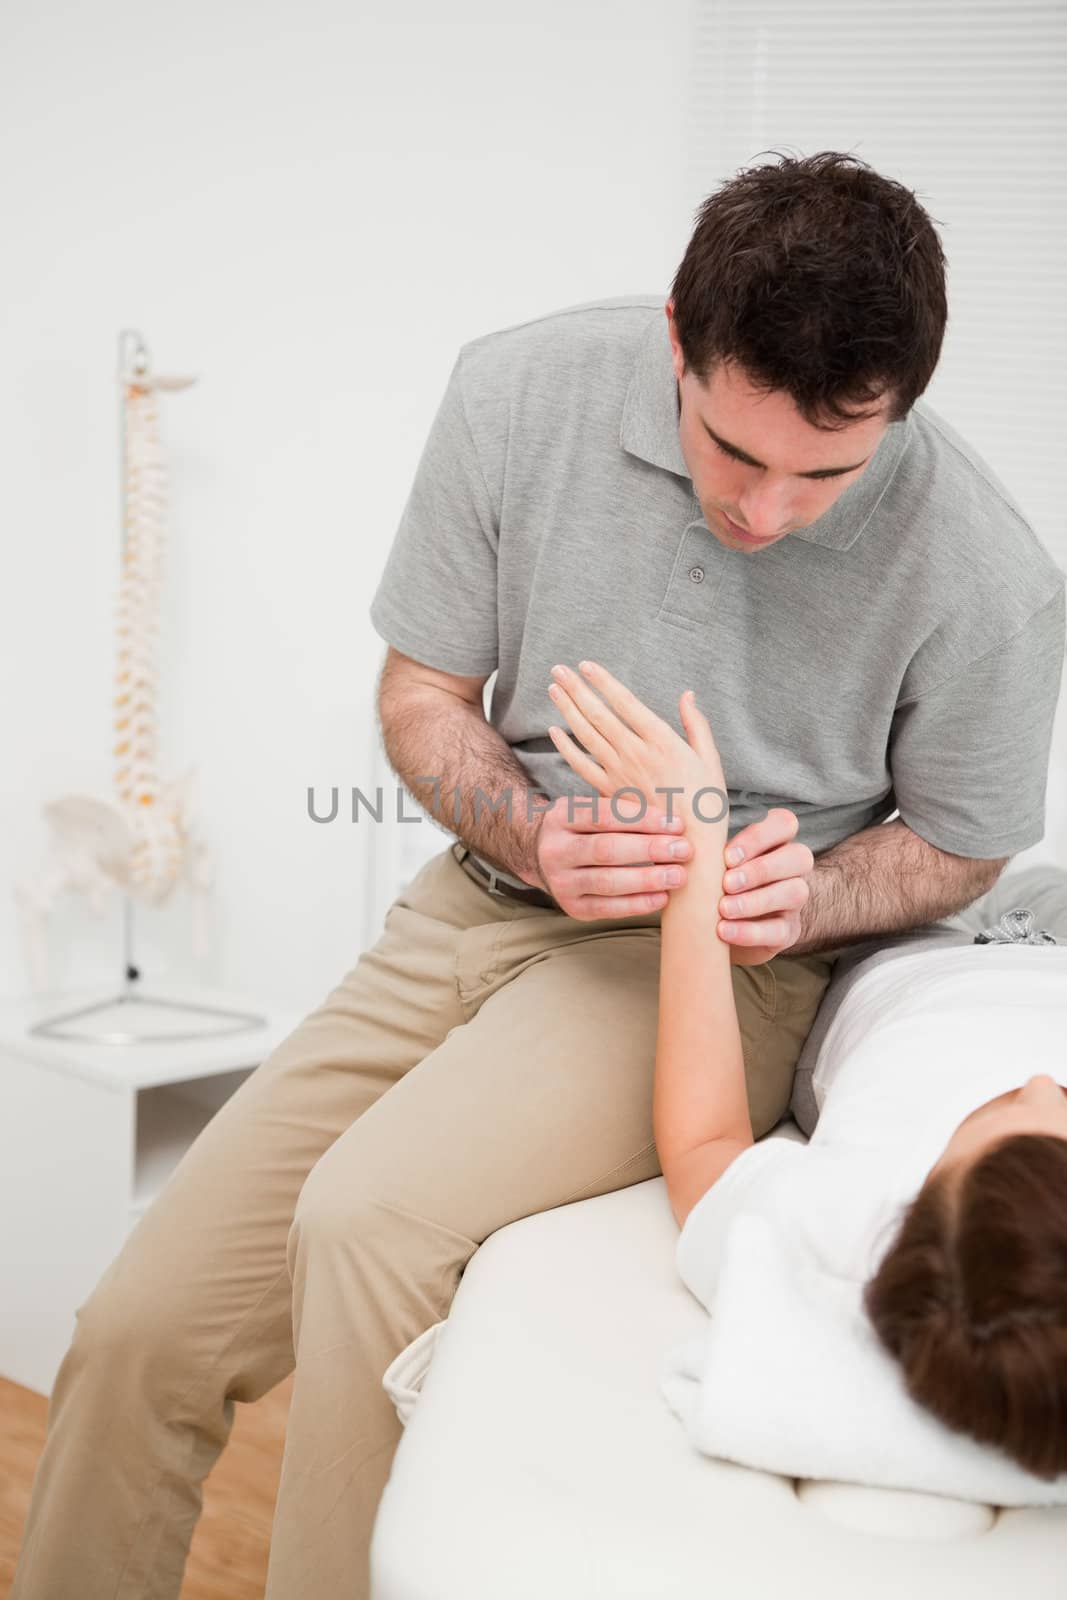 Physiotherapist placing his fingers on the hand of a patient in a room